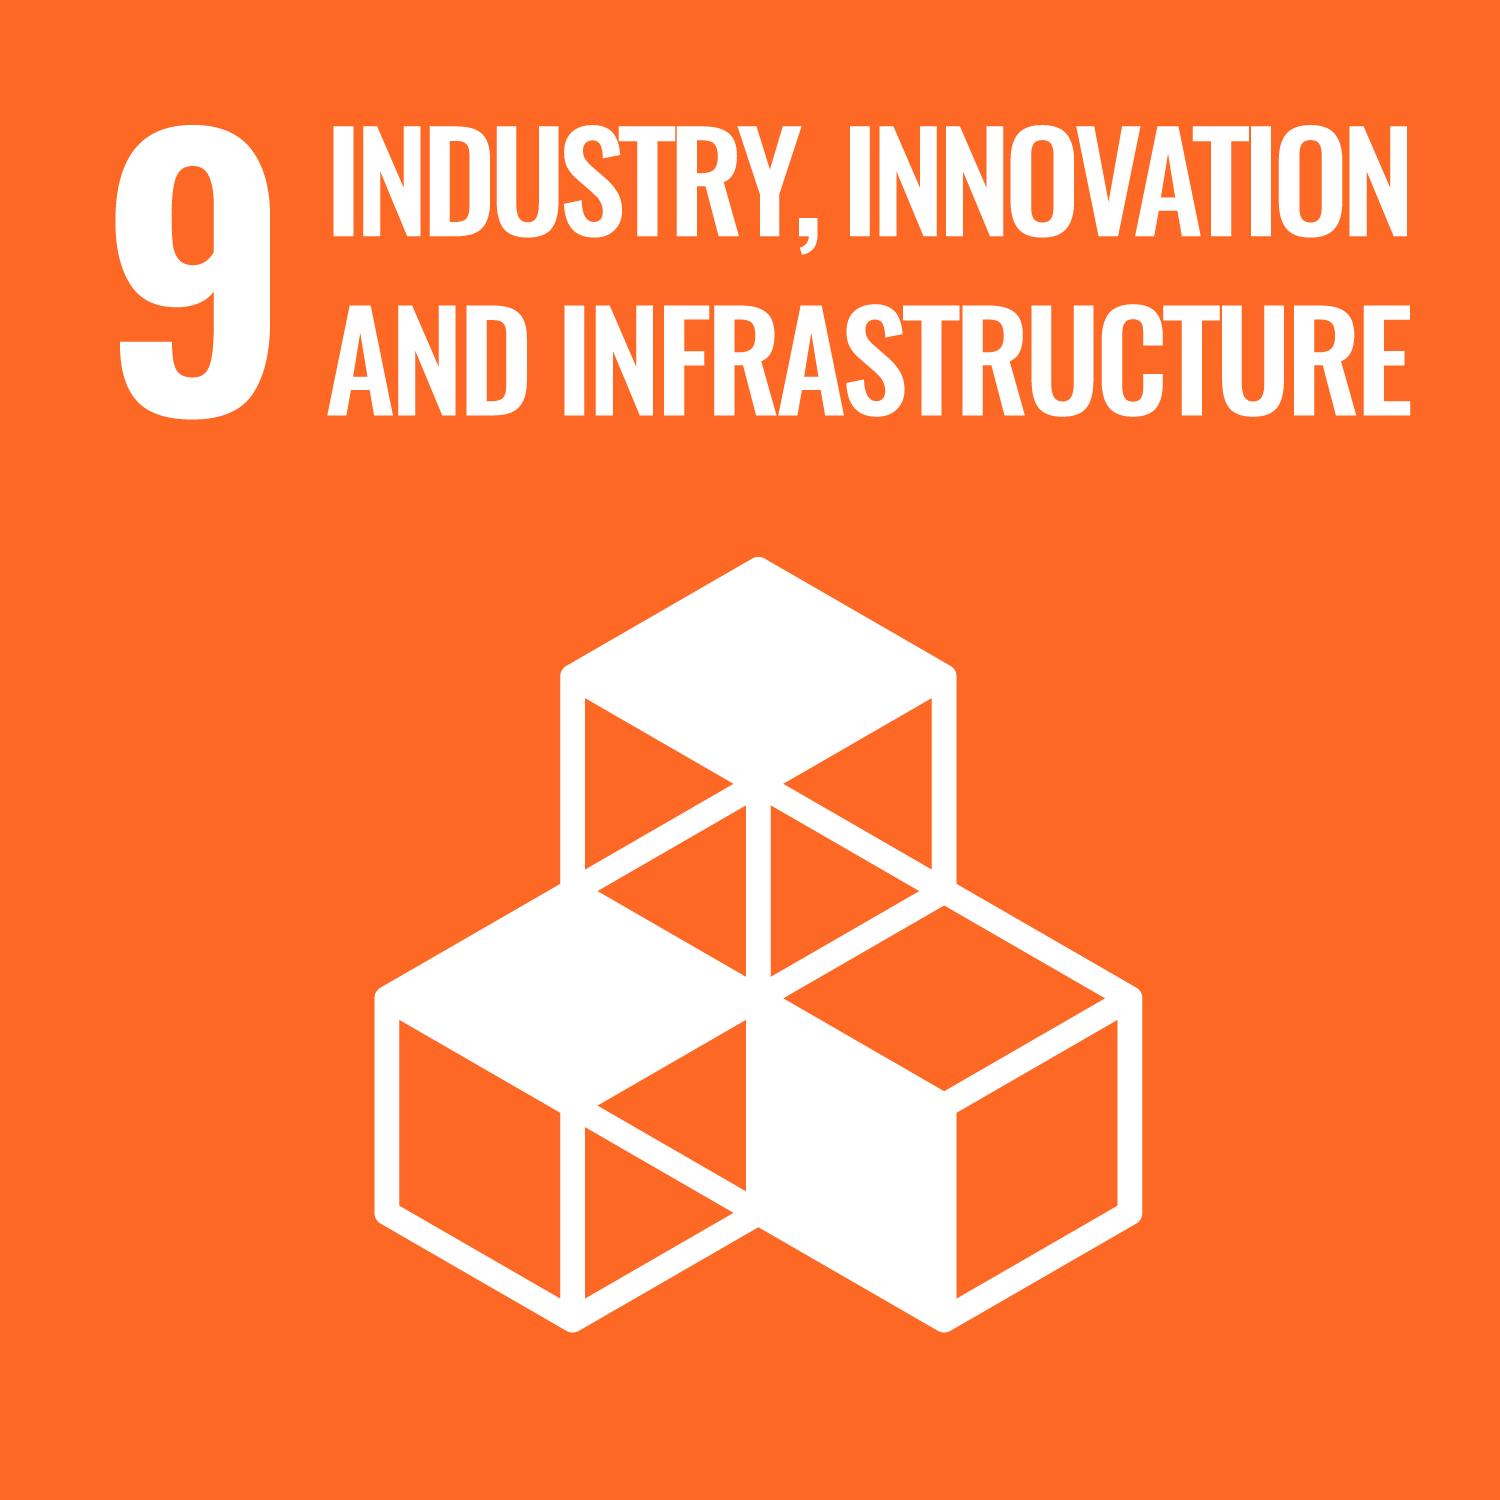 Goal number 9: Industry, innovation and infrastructure